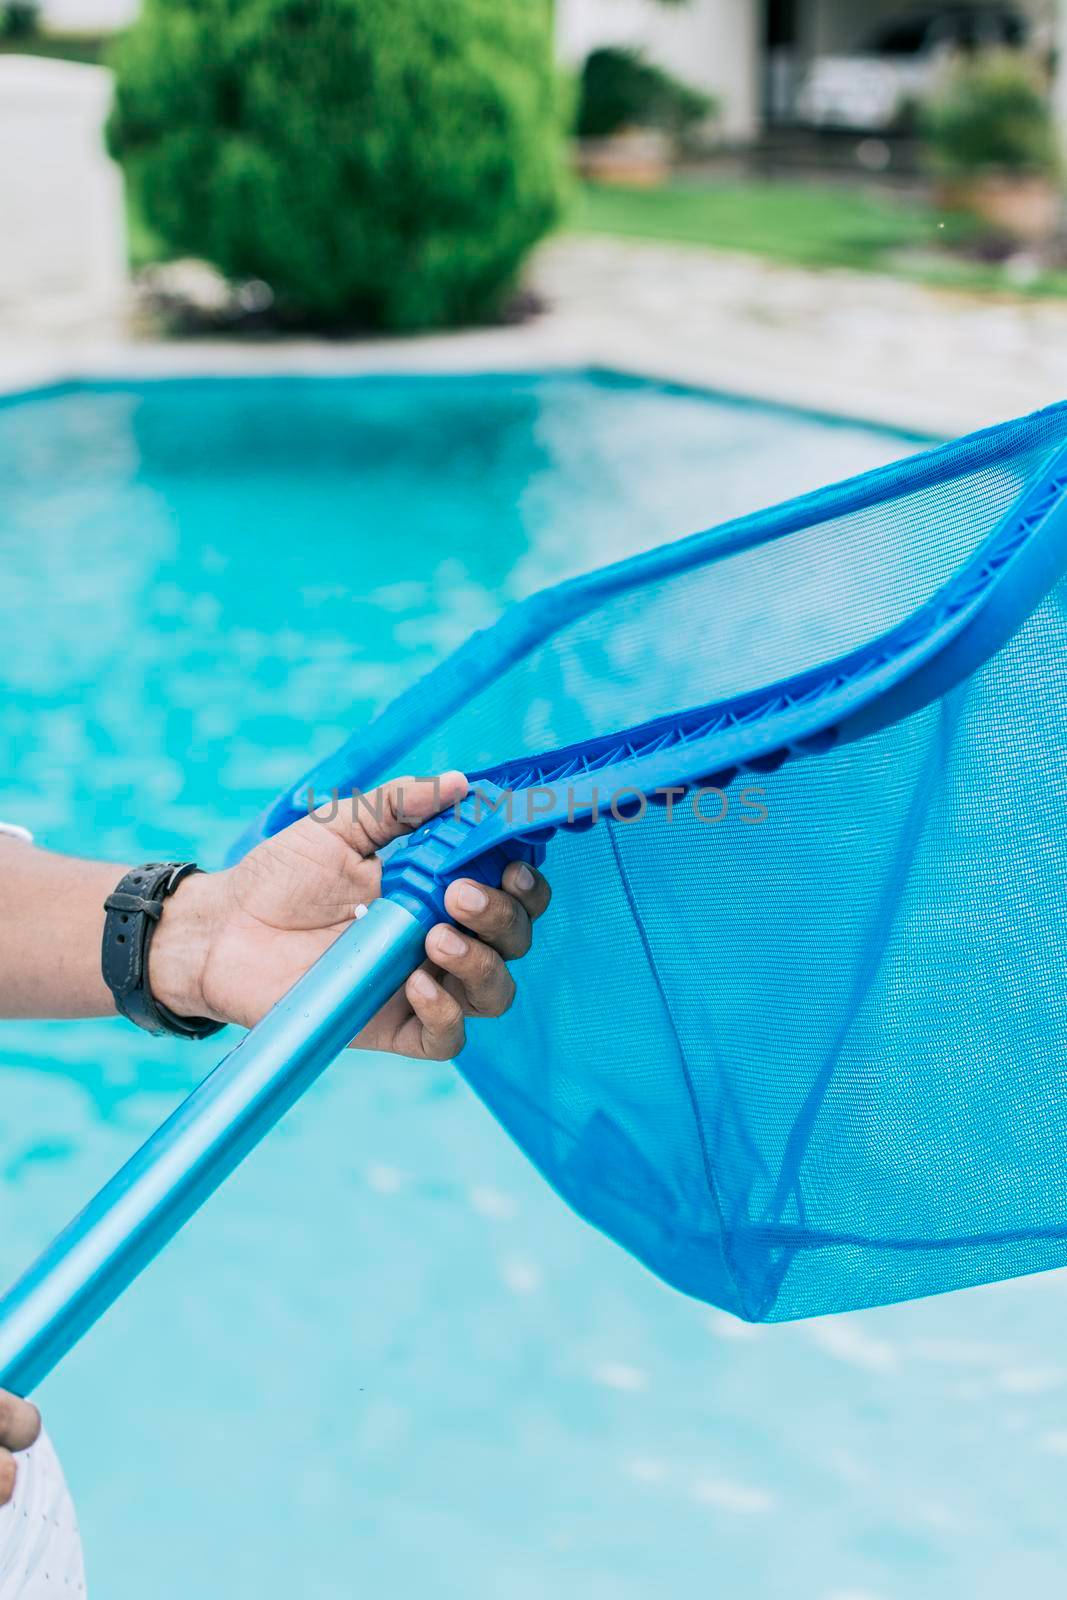 Hands holding a skimmer with blue pool in the background, A man cleaning pool with leaf skimmer. Man cleaning the pool with the Skimmer, Person with skimmer cleaning pool by isaiphoto